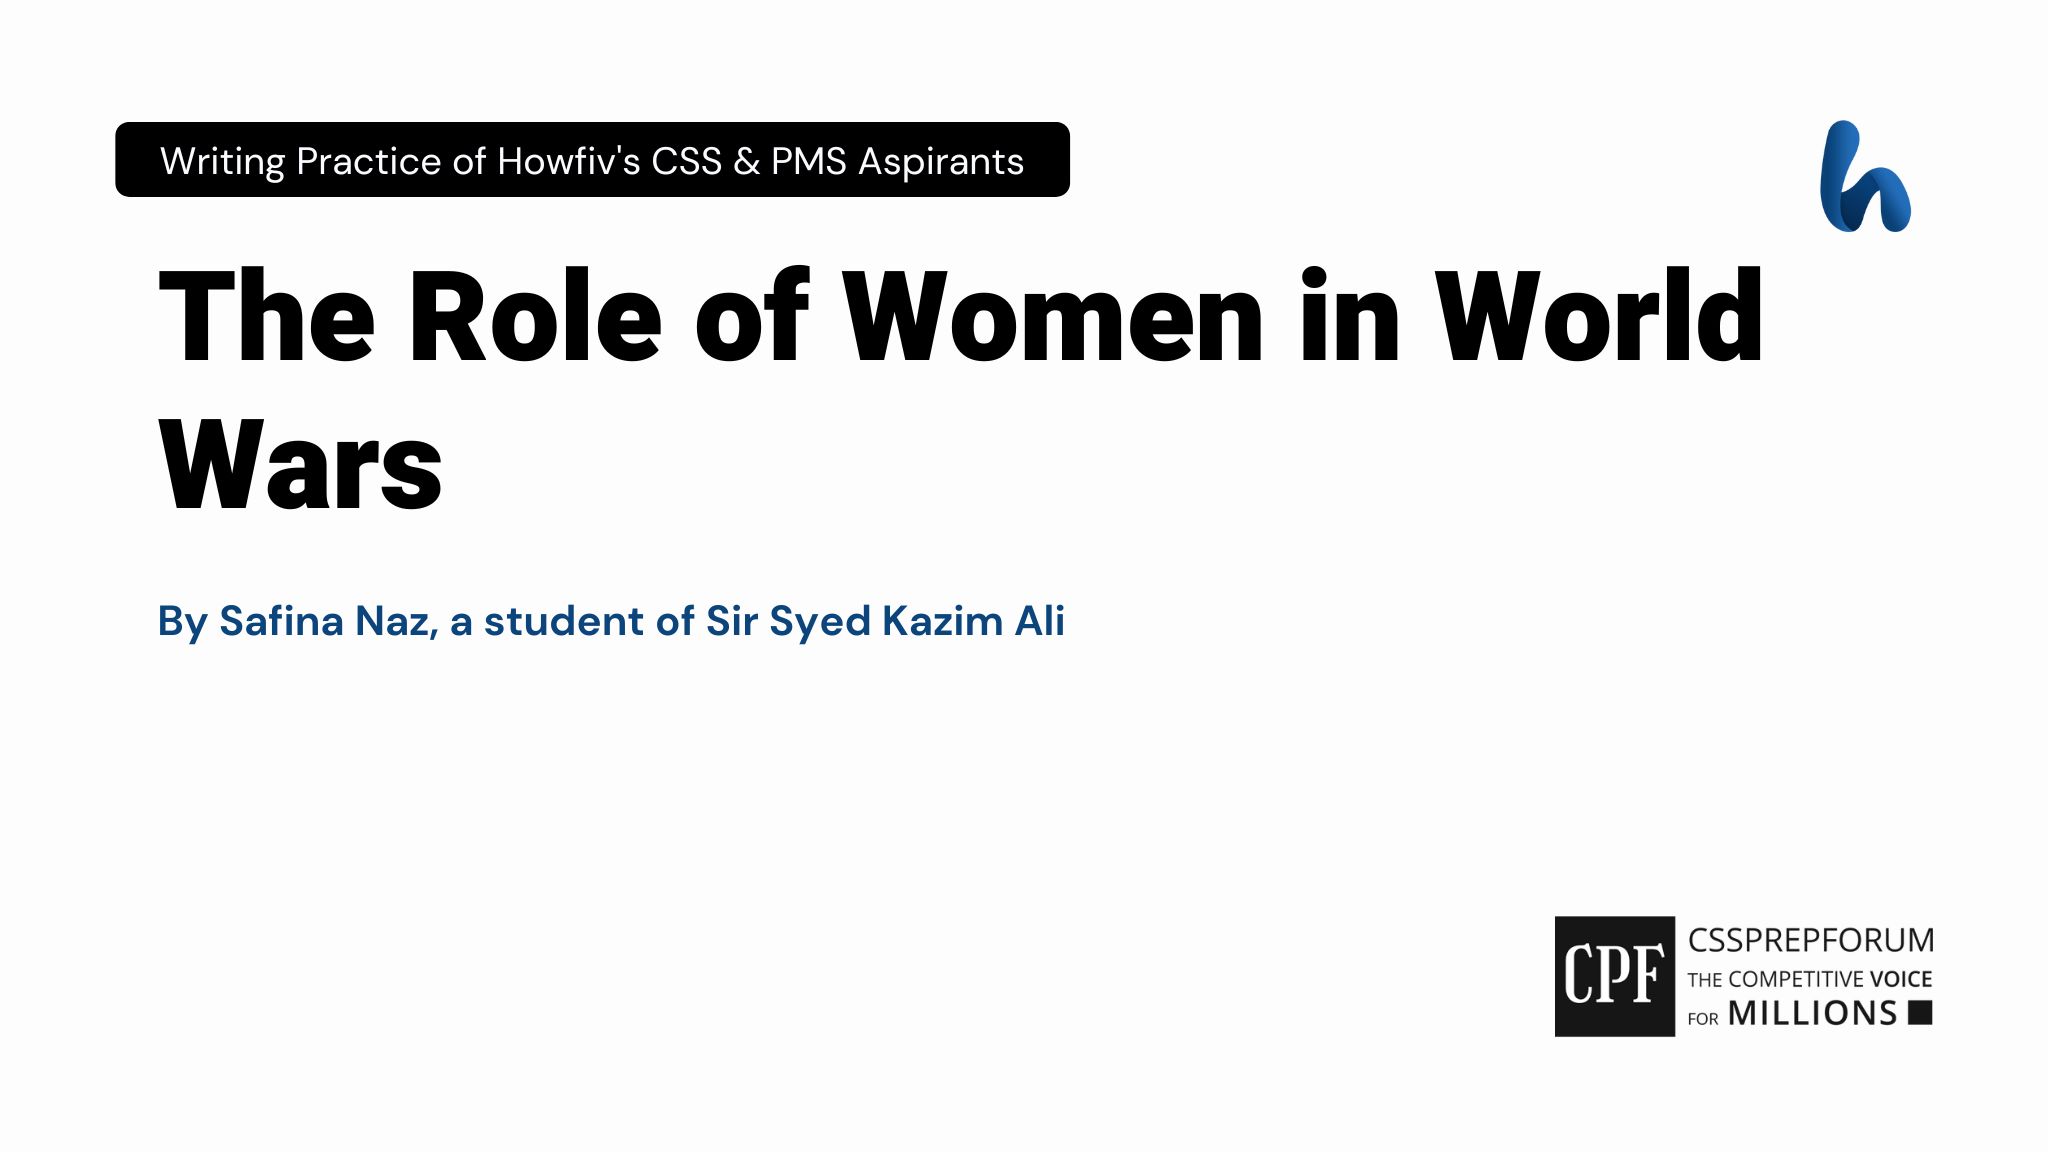 The Role of Women in World Wars by Safina Naz